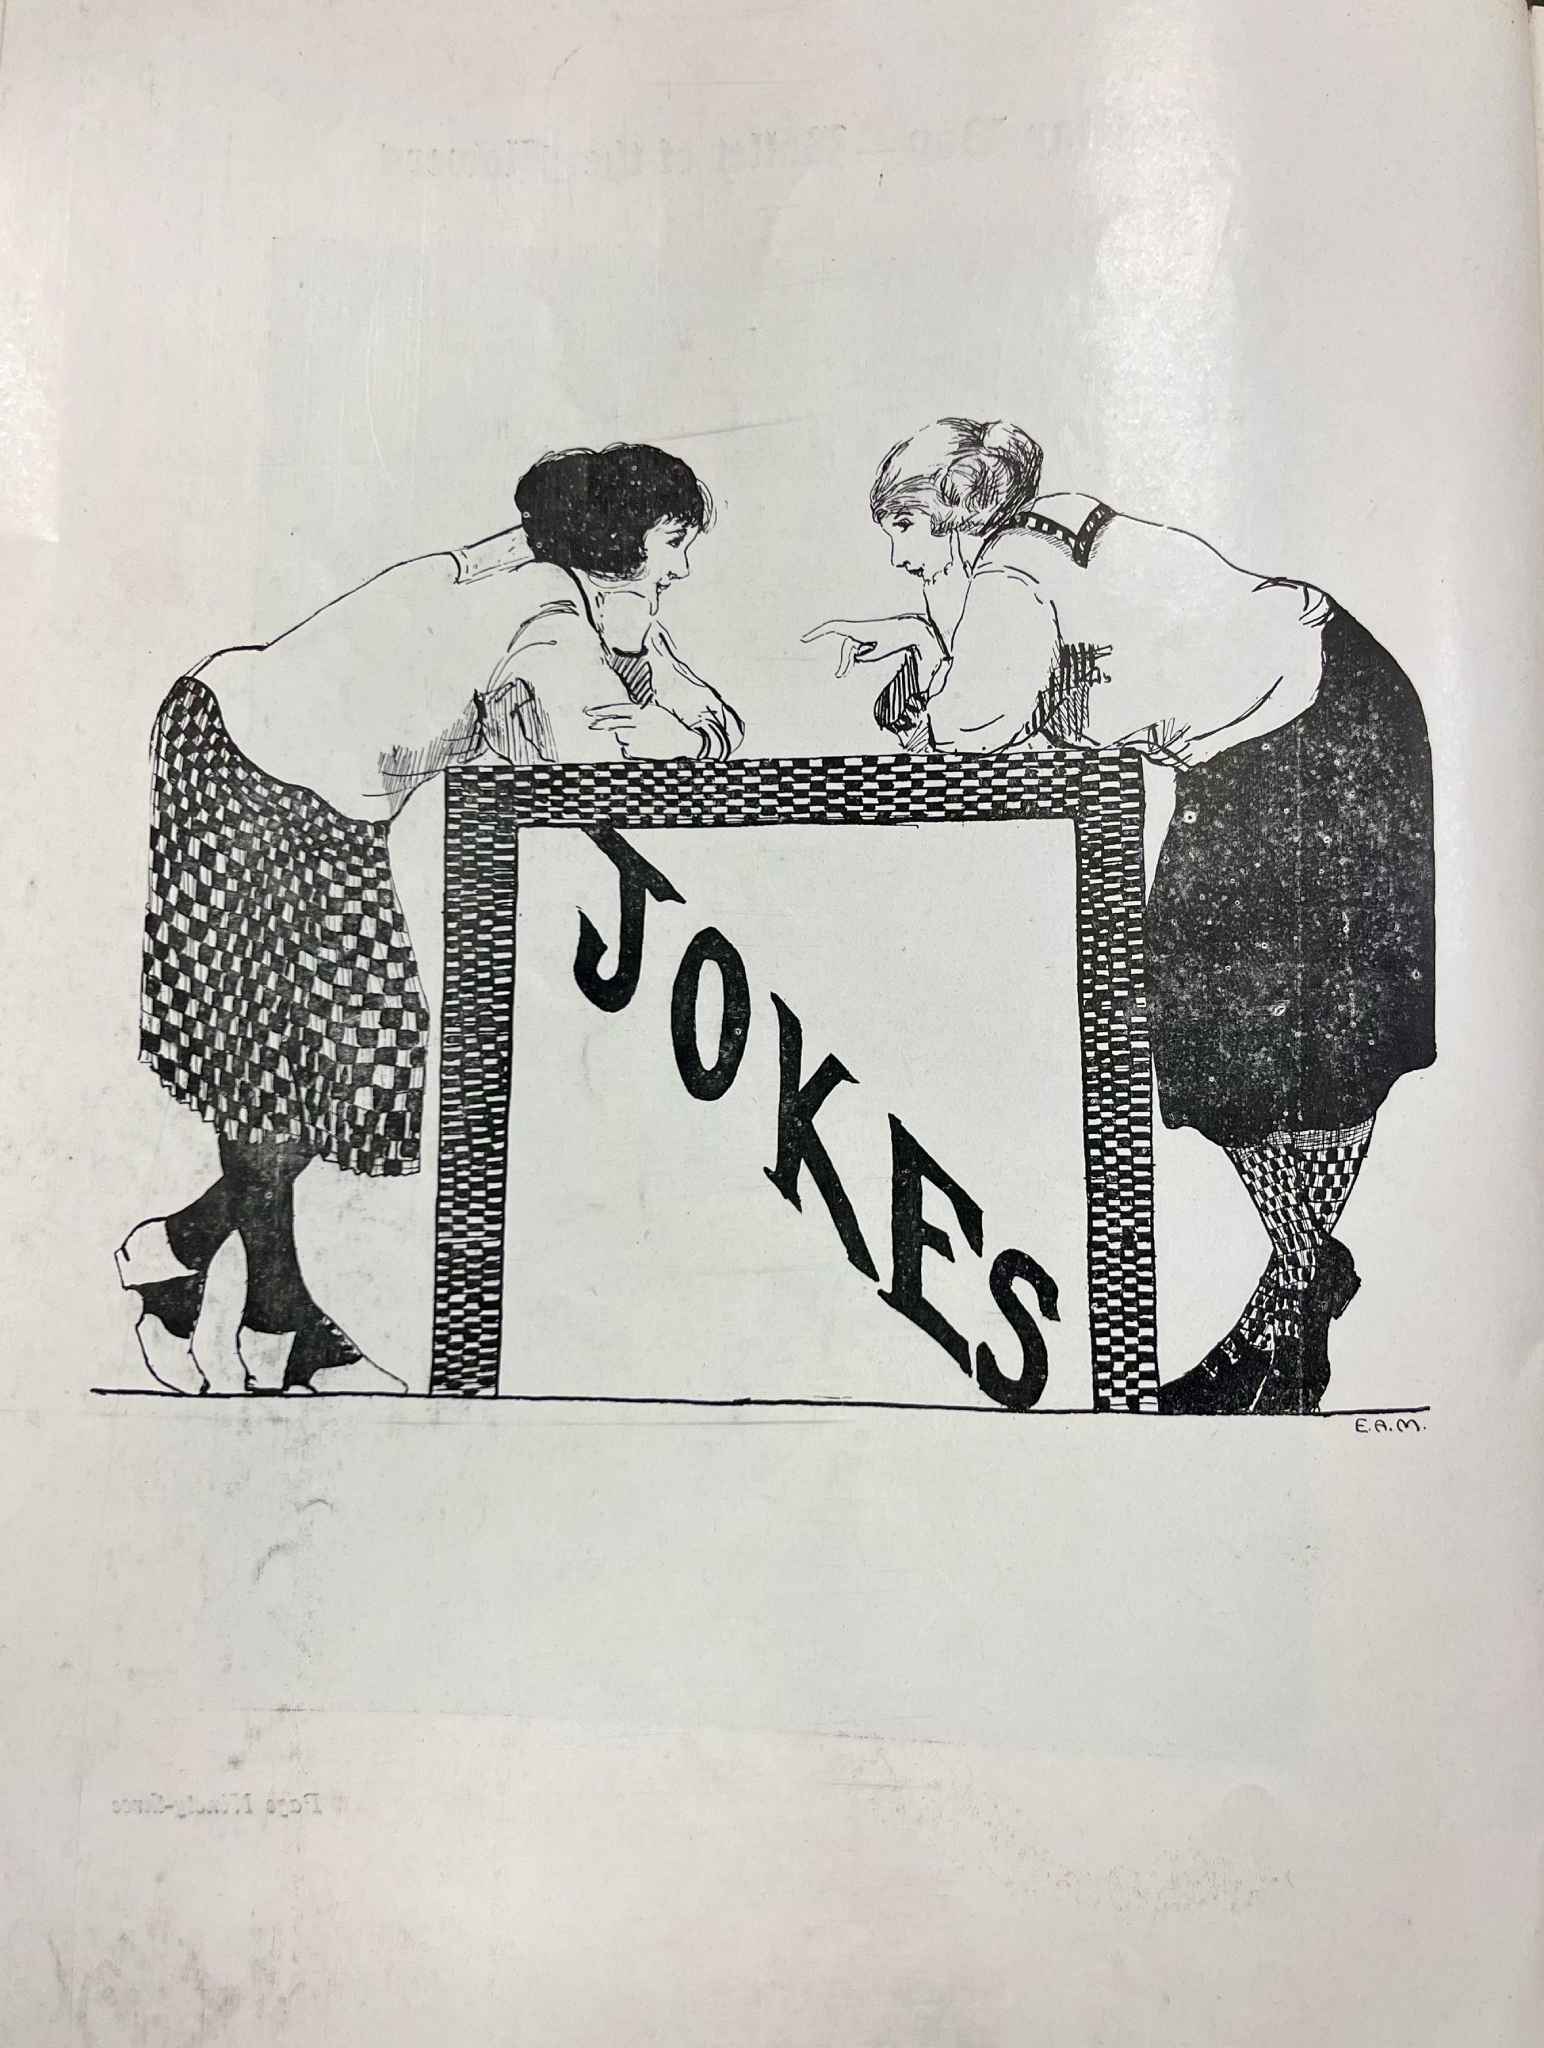 Vintage illustration of two women in 20s dress leaning over a table with JOKES written across it.